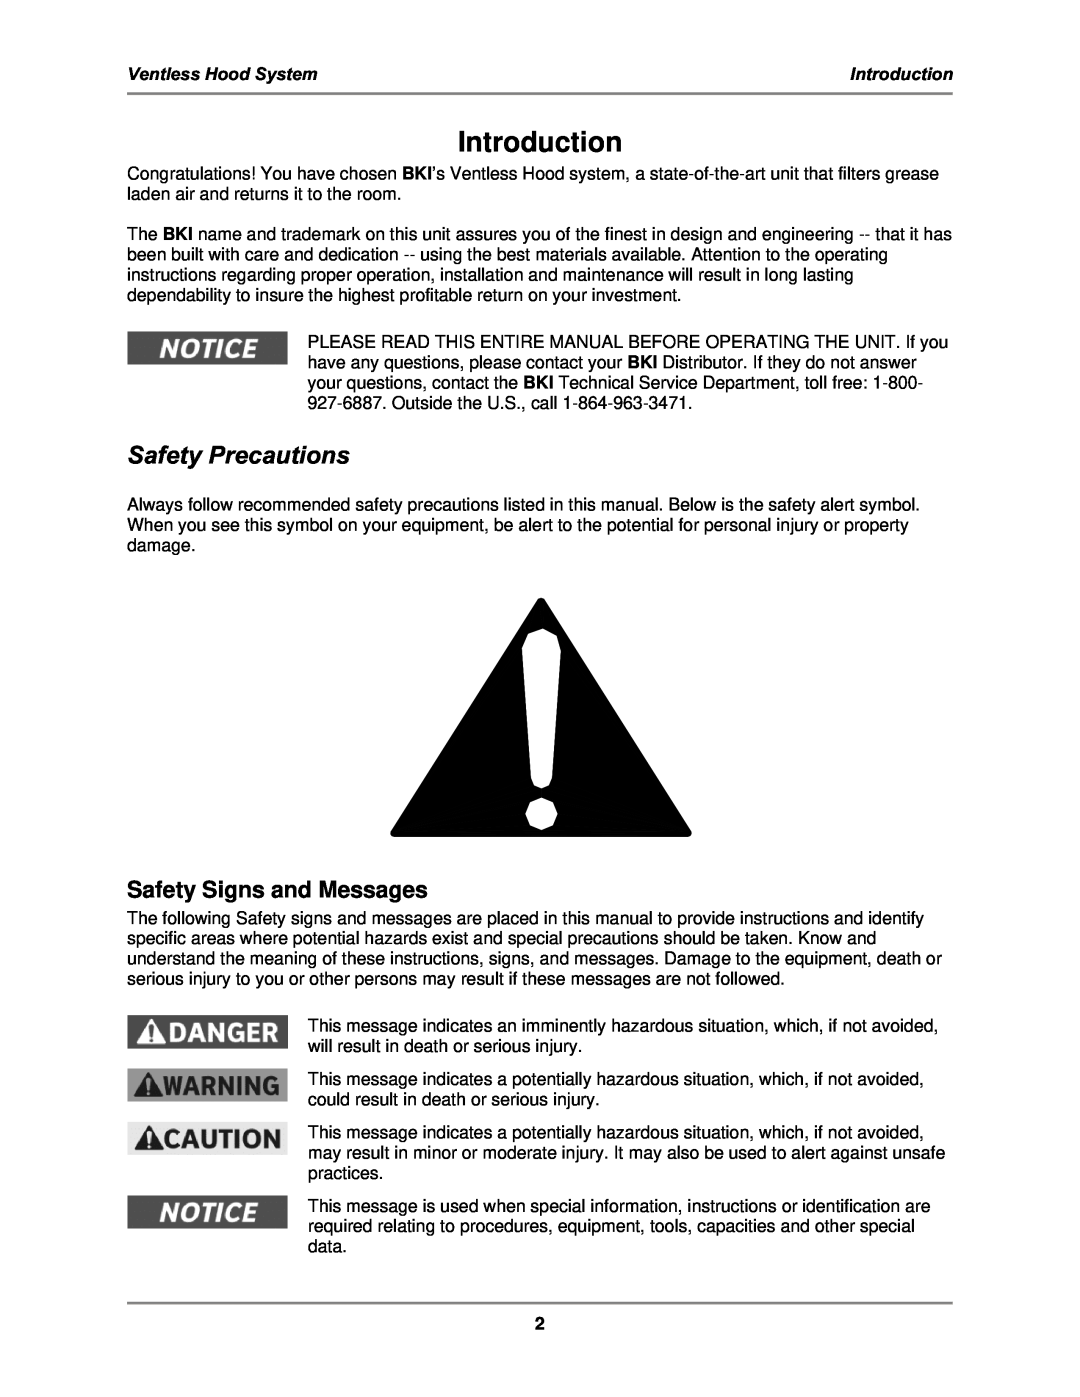 Bakers Pride Oven FH-28 operation manual Introduction, Safety Precautions, Safety Signs and Messages, Ventless Hood System 